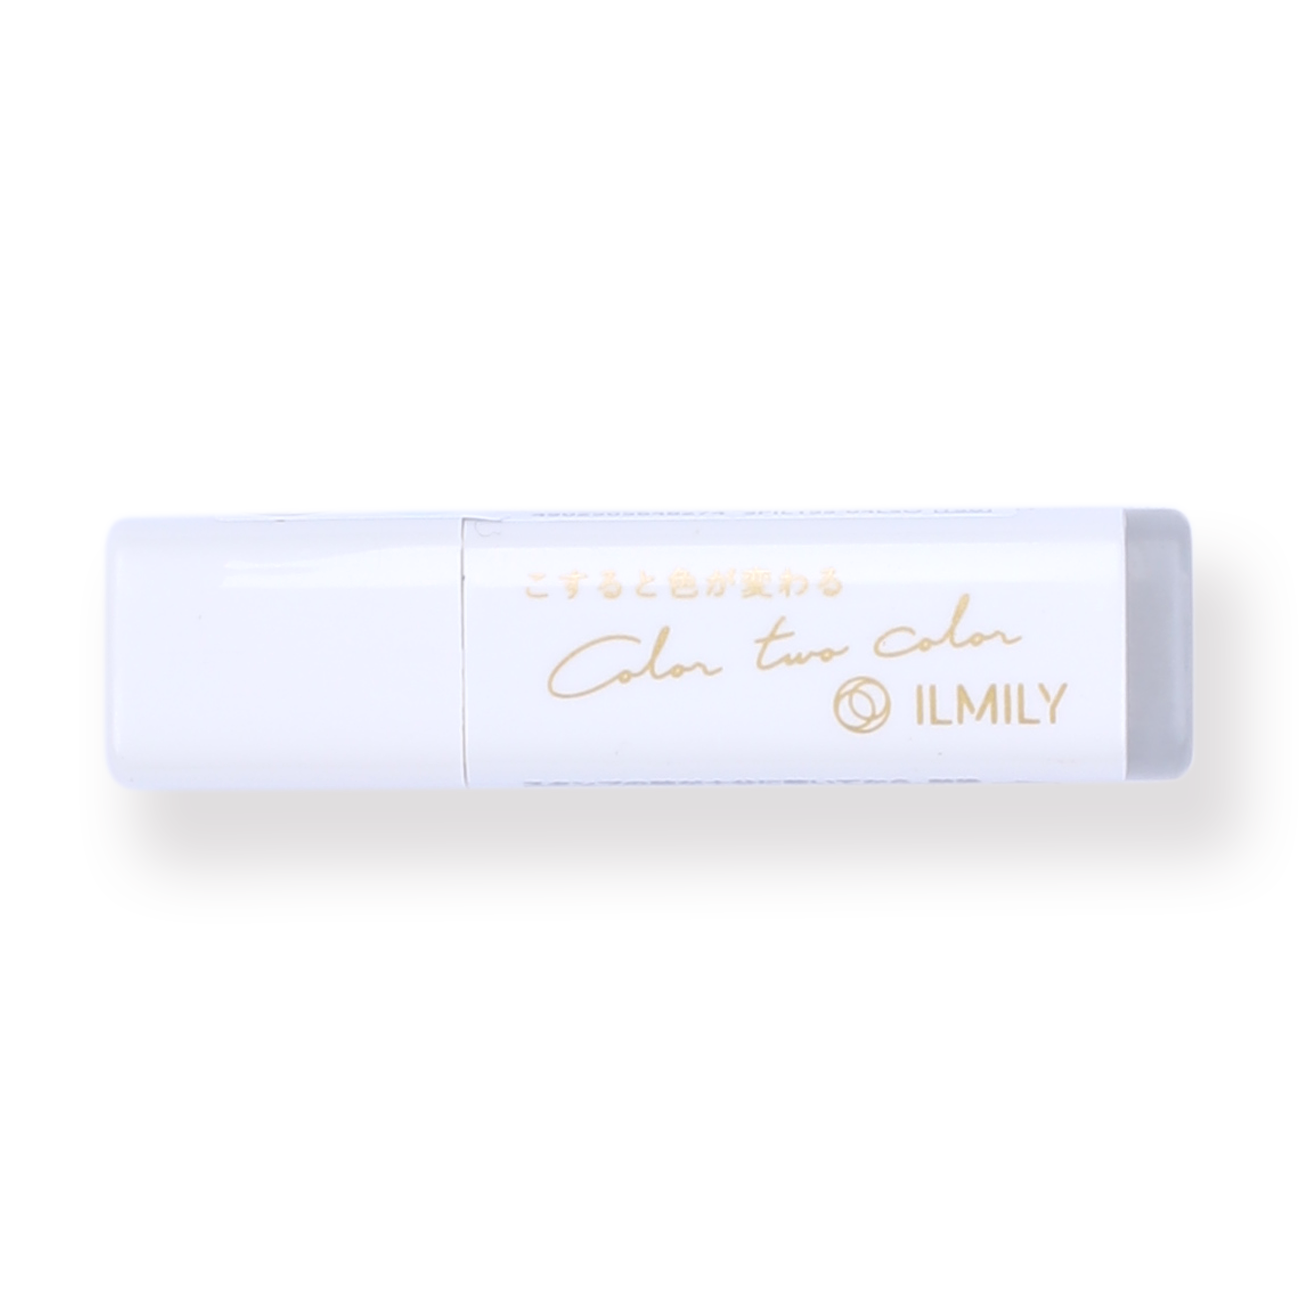 Pilot ILMILY Limited Edition Erasable Stamp - Cup